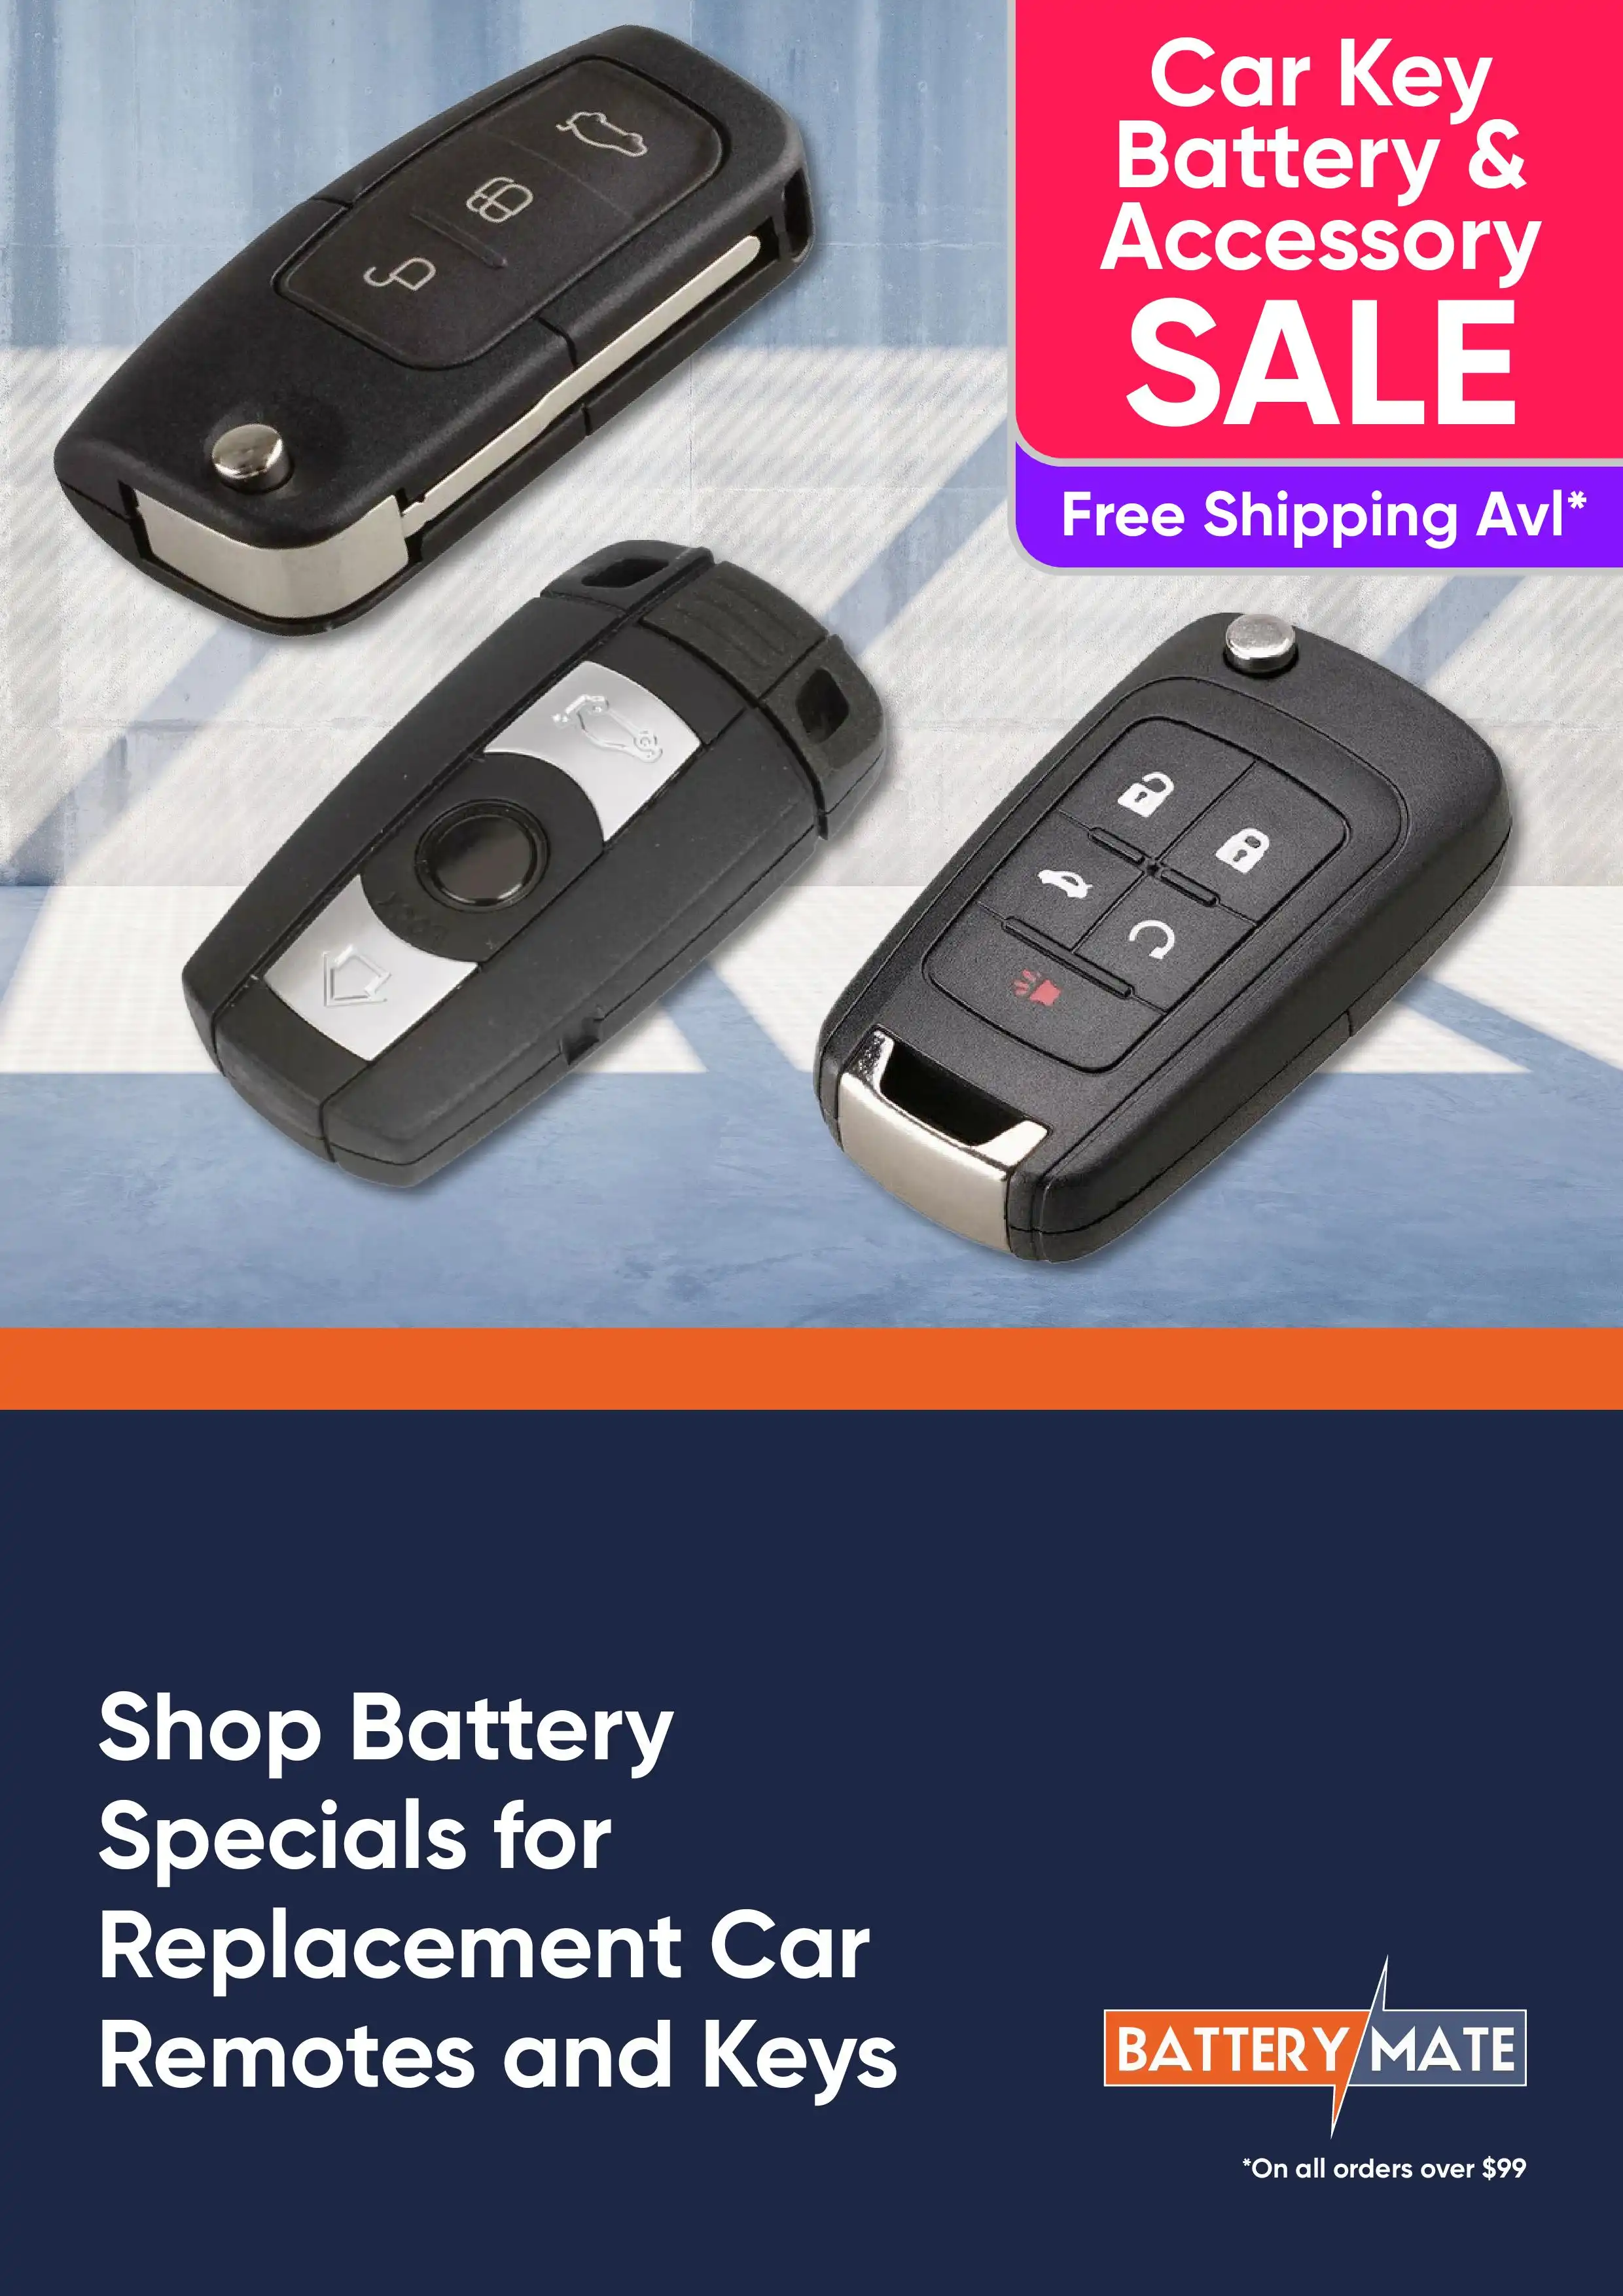 Shop Battery Specials for Replacement Car Remotes and Keys